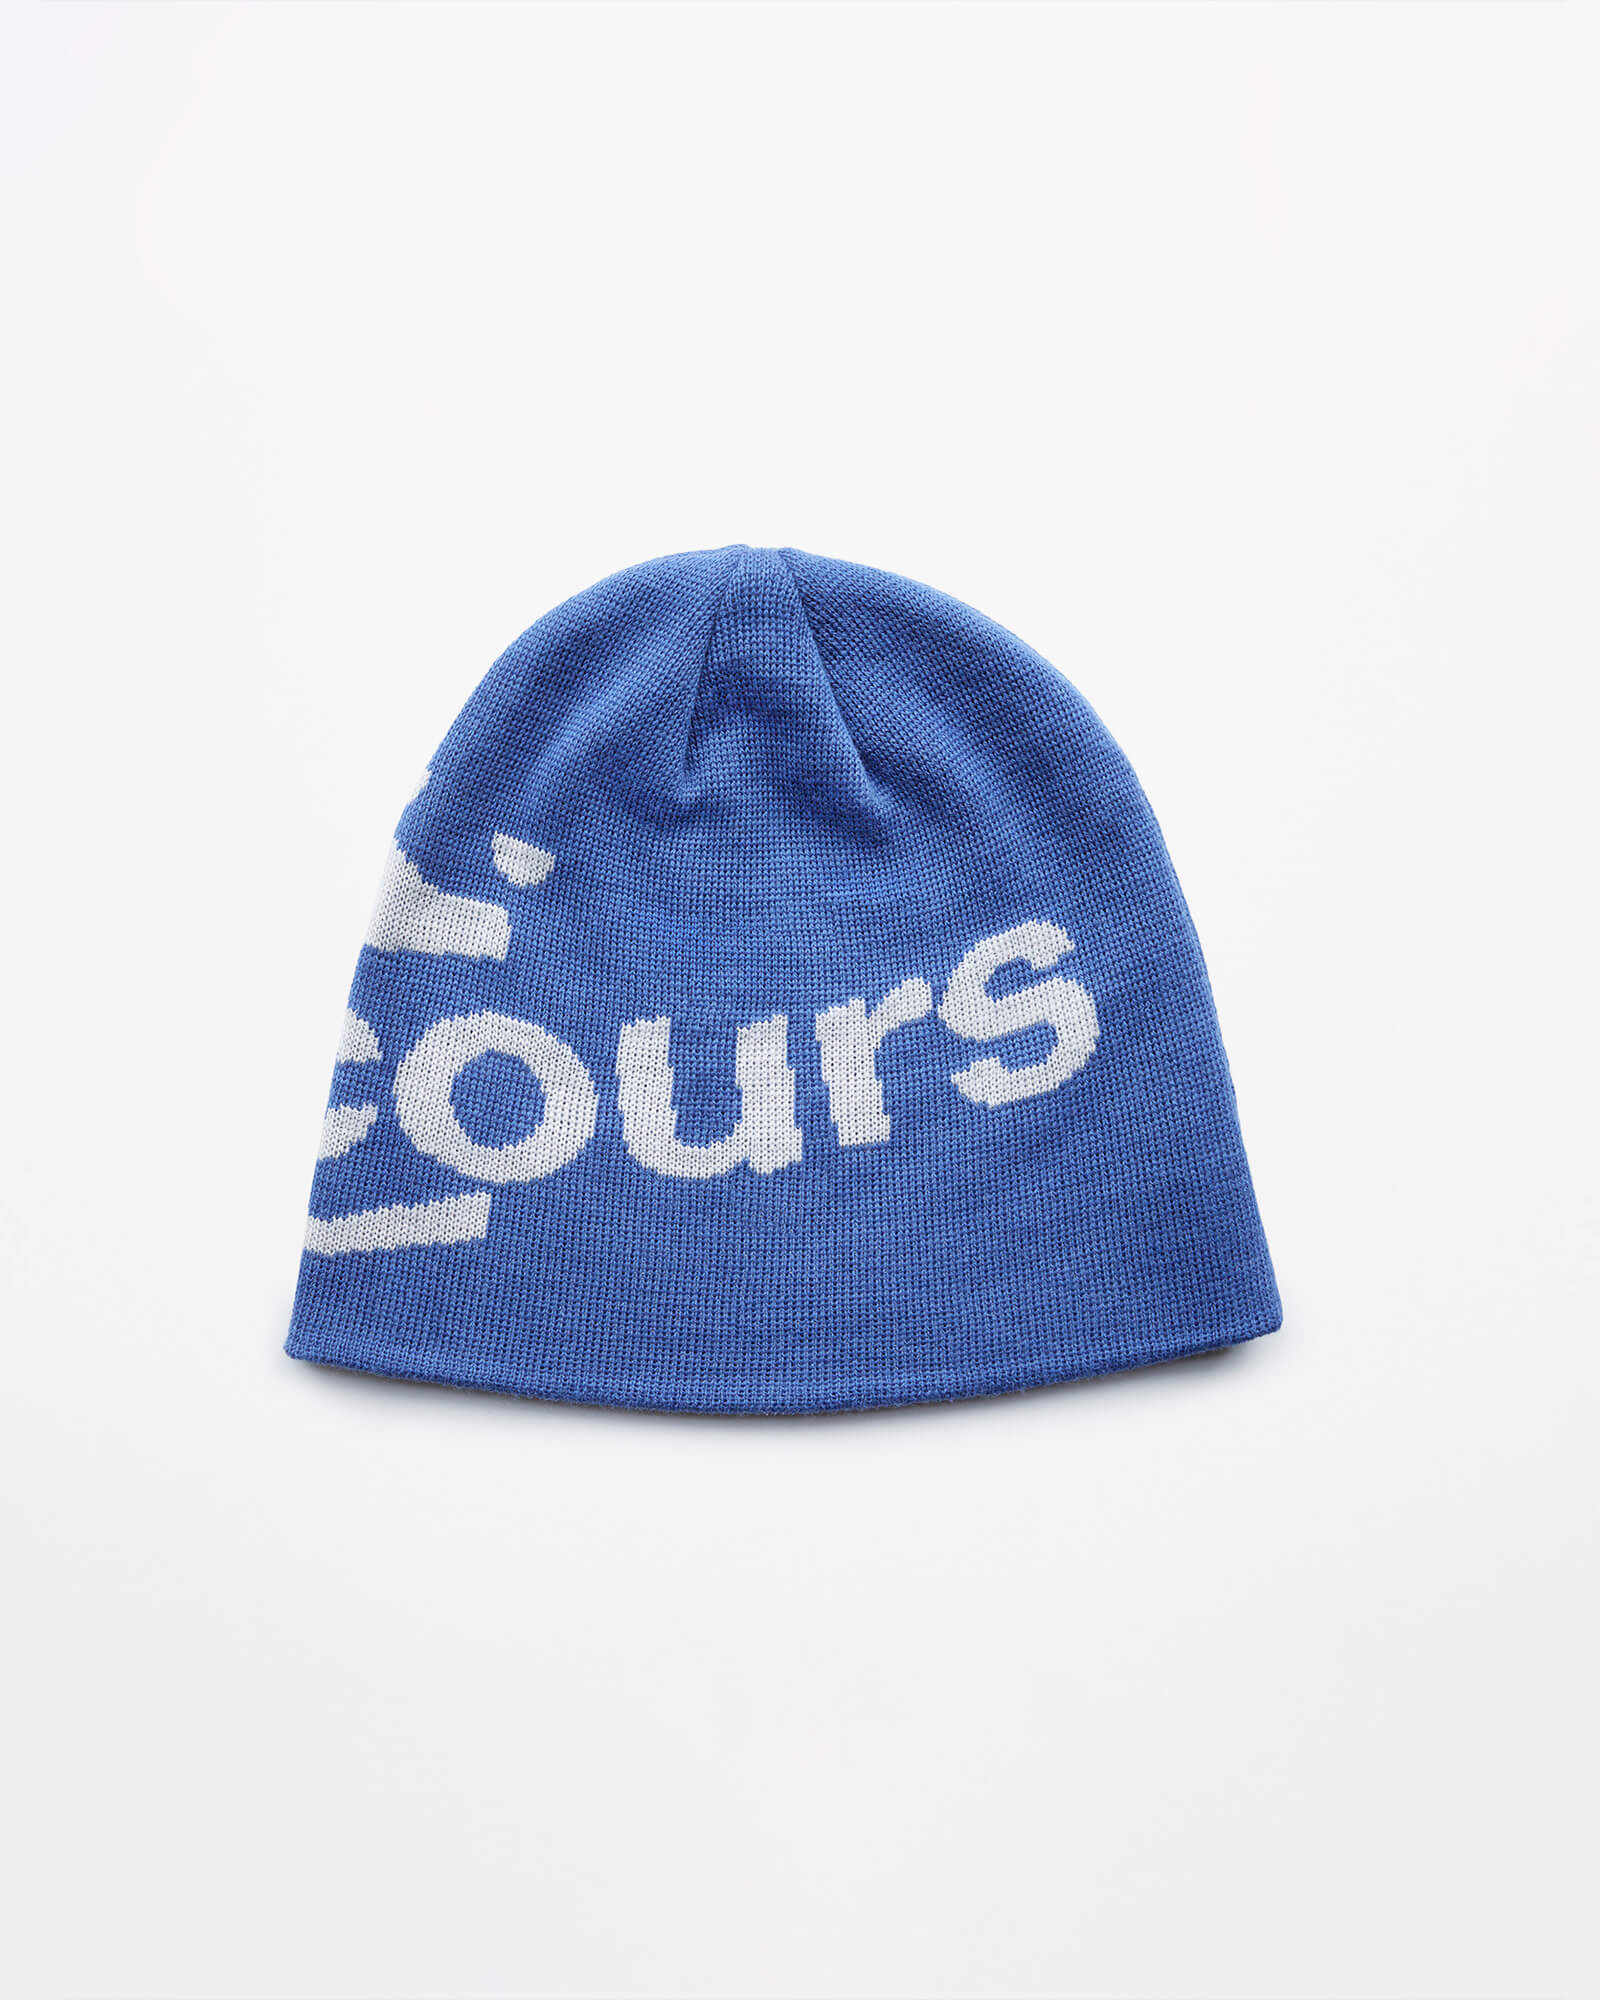 Blue and Grey Concours Beanie Back